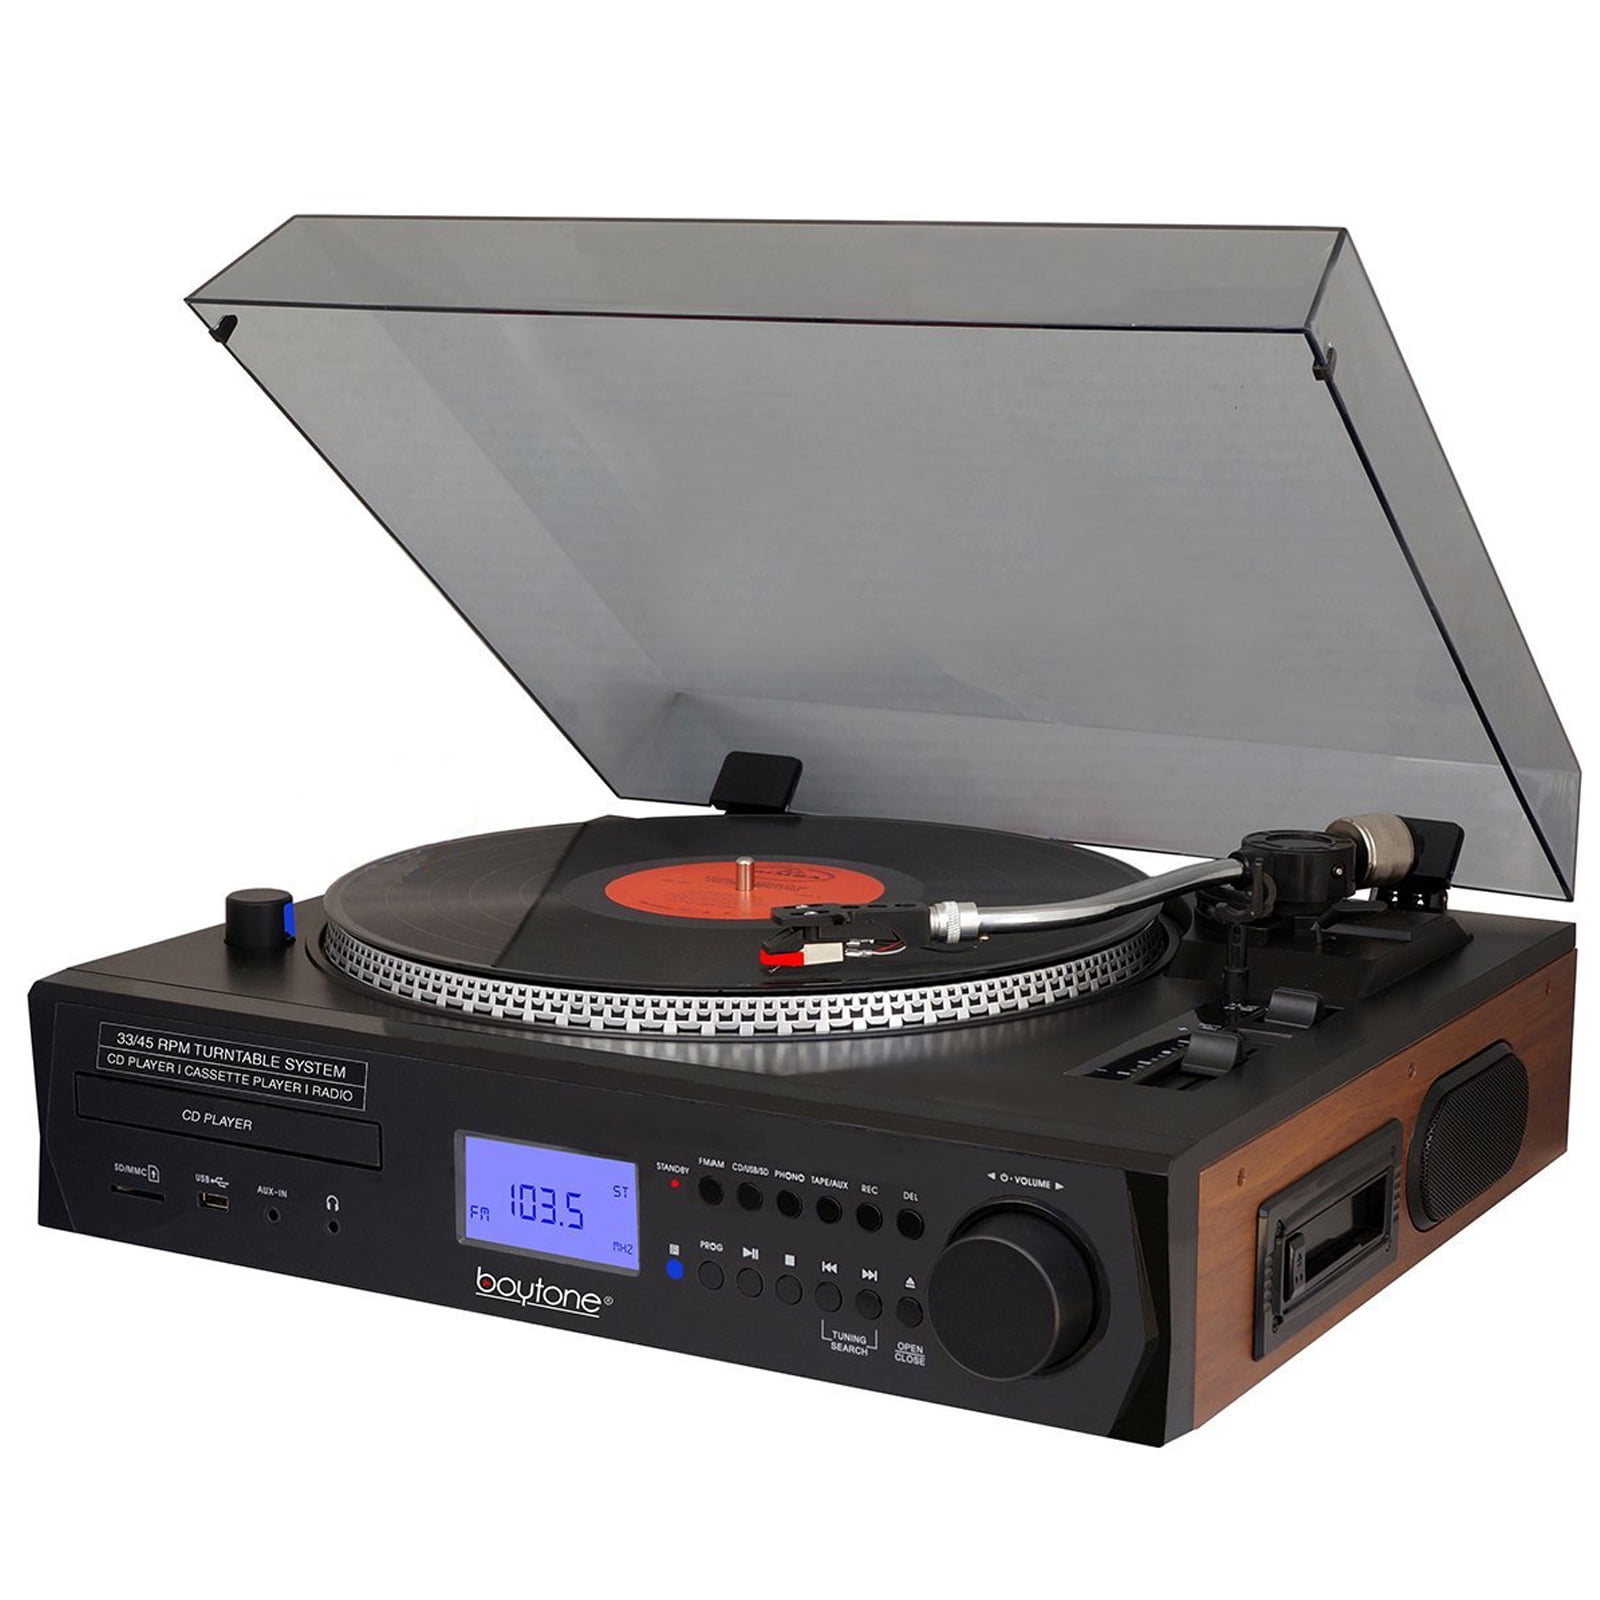 Boytone Fully Automatic Large size Turntable, BT Cord free, built in 2  Stereo speaker S-Shaped Tone Arm with Adjustable Counterweight & pitch  control,